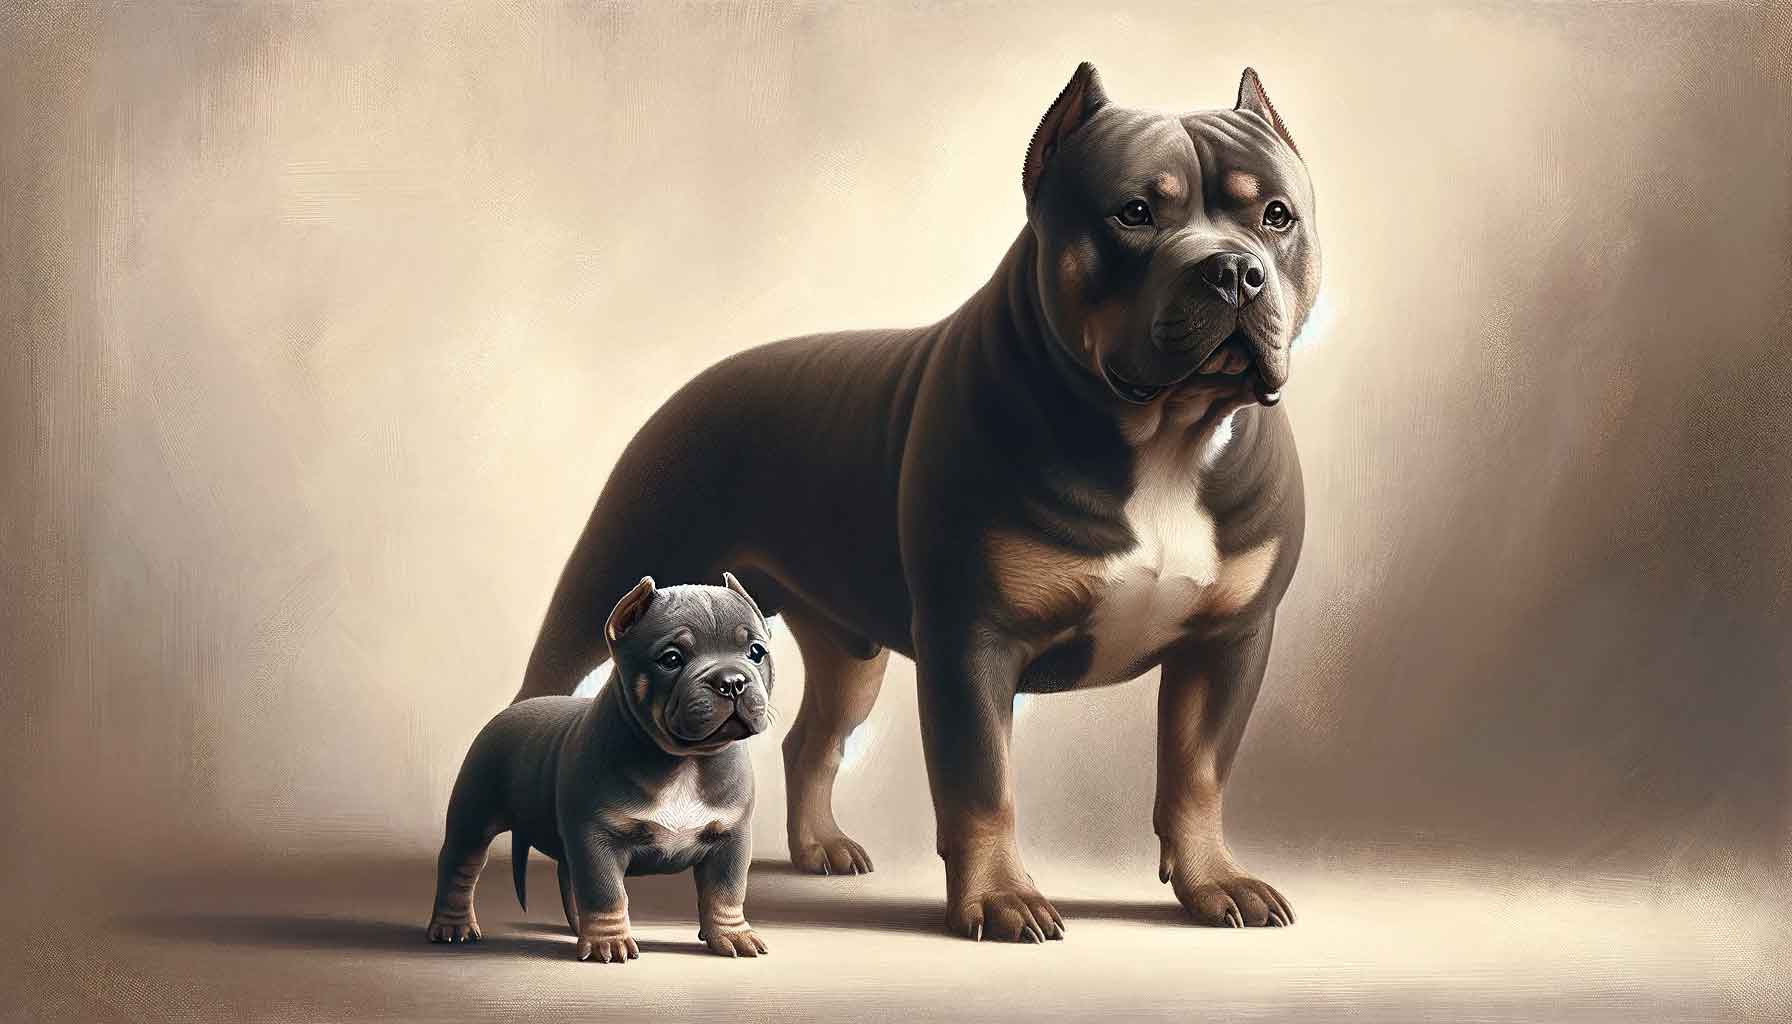 A digital painting depicting a robust American Bully standing protectively next to a petite Micro Bully. Both dogs display unique physical traits but exhibit a clear familial resemblance.